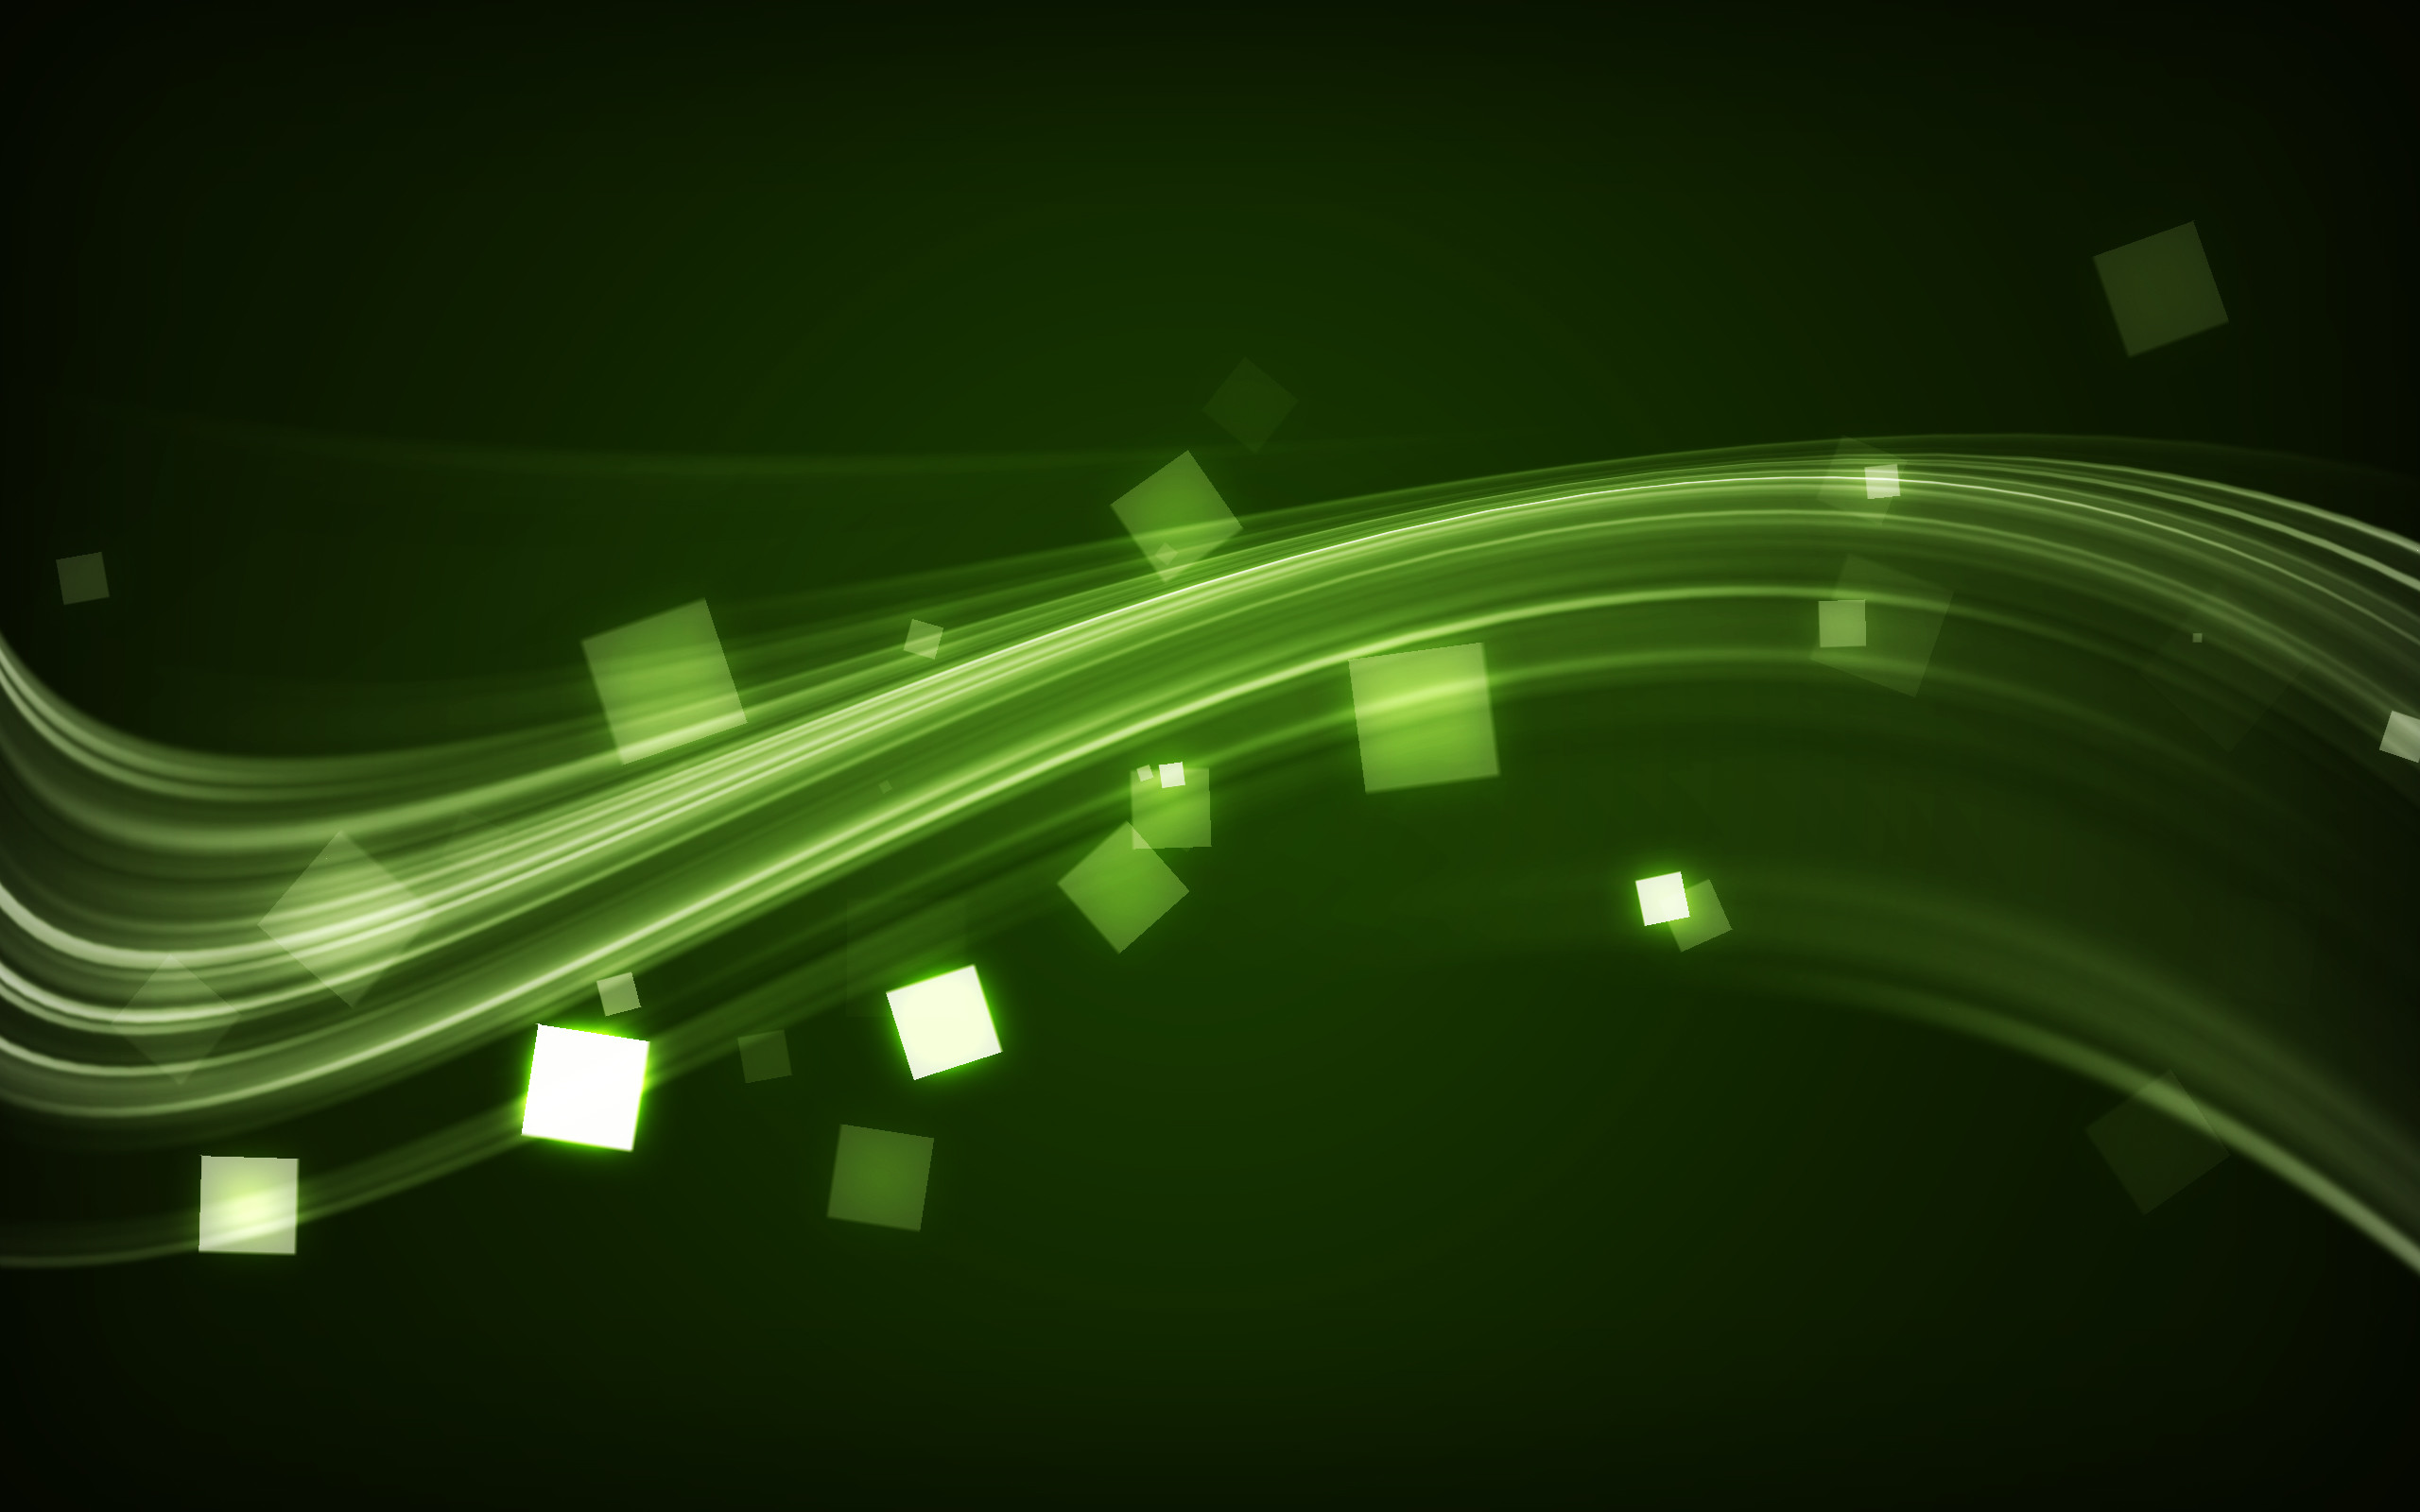 2560x1600 Windows 10 Wallpaper on this post is one of my favorite picture, an  abstract image with green electric waves. If you want to make your PC  desktop looks cool ...